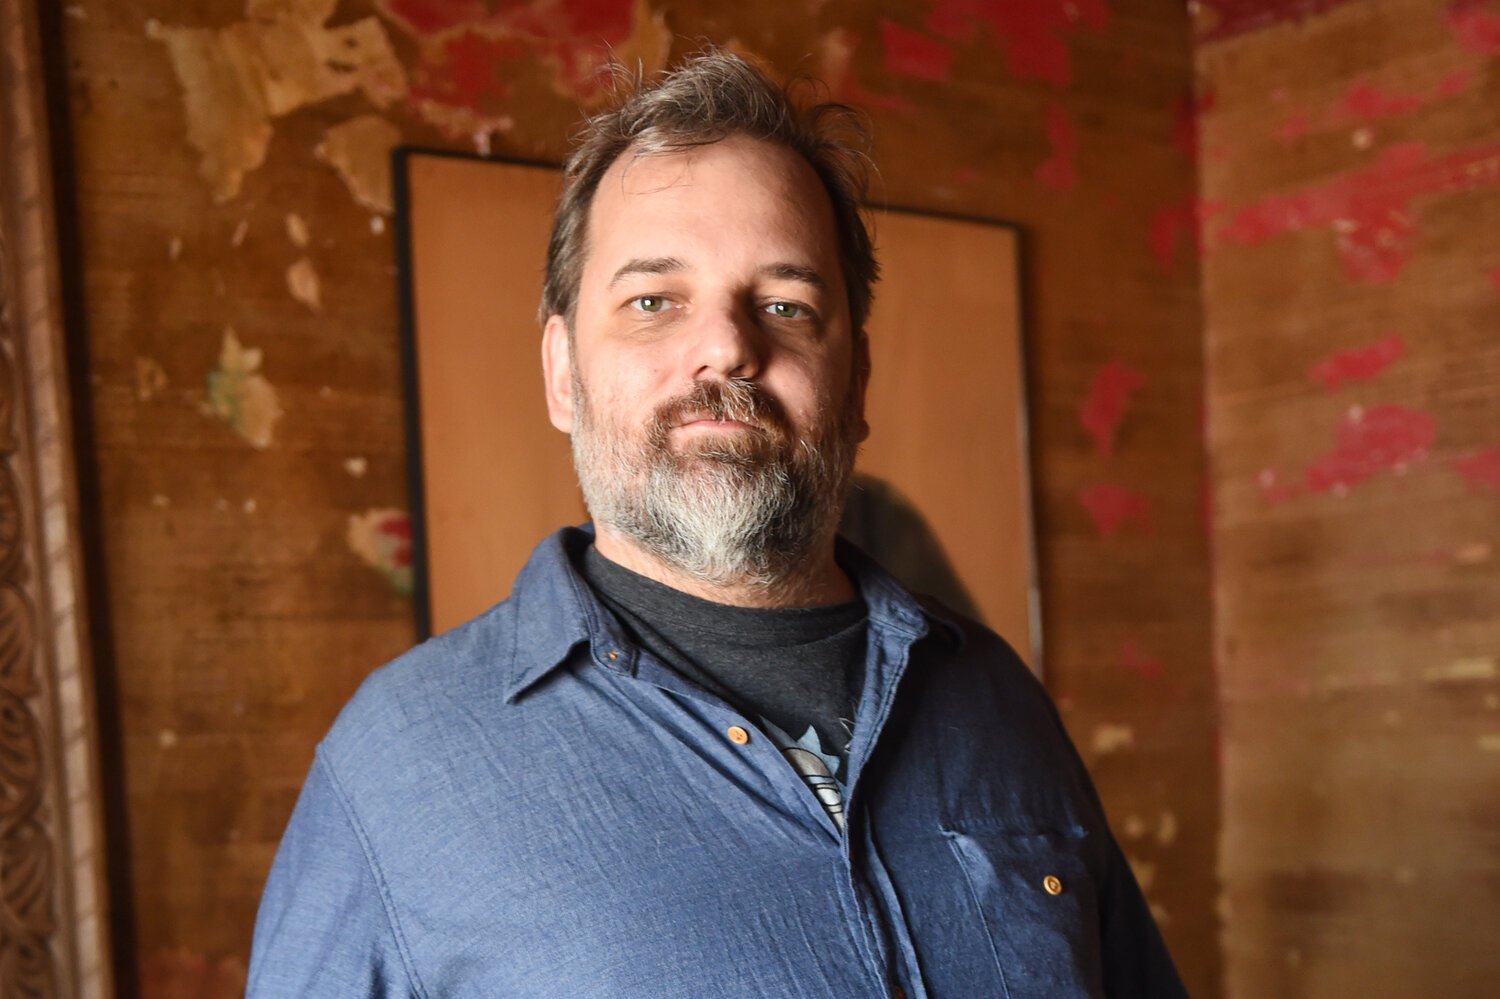 ‘Rick and Morty’ Creator Dan Harmon Admits He Used to Be ‘the Guy Who’s Angry At Women’